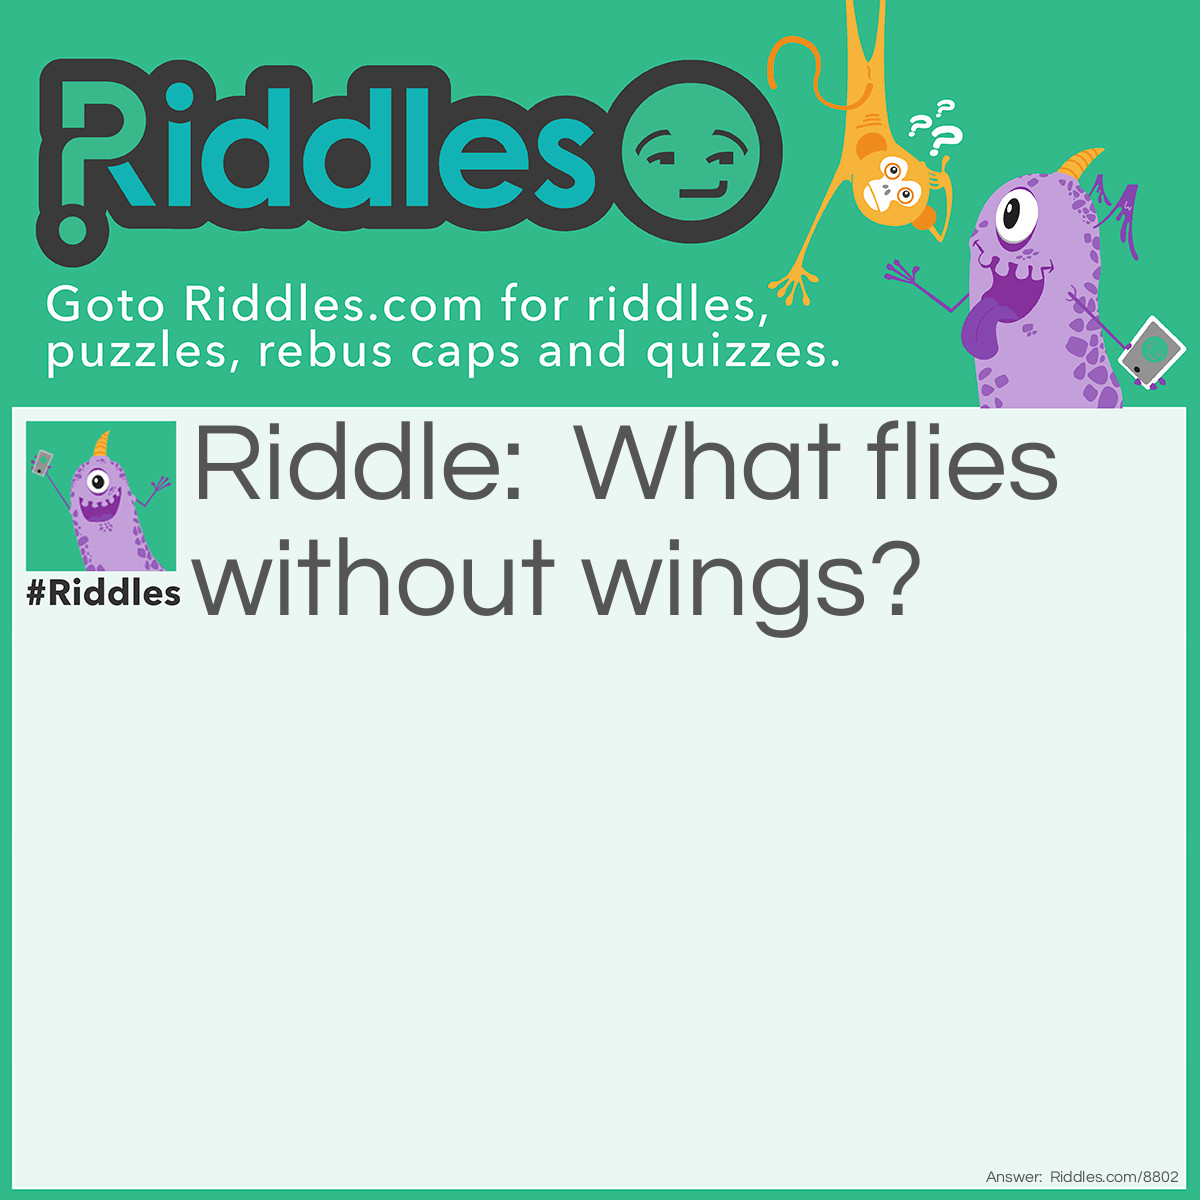 Riddle: What flies without wings? Answer: Time. I knew you would get it right.